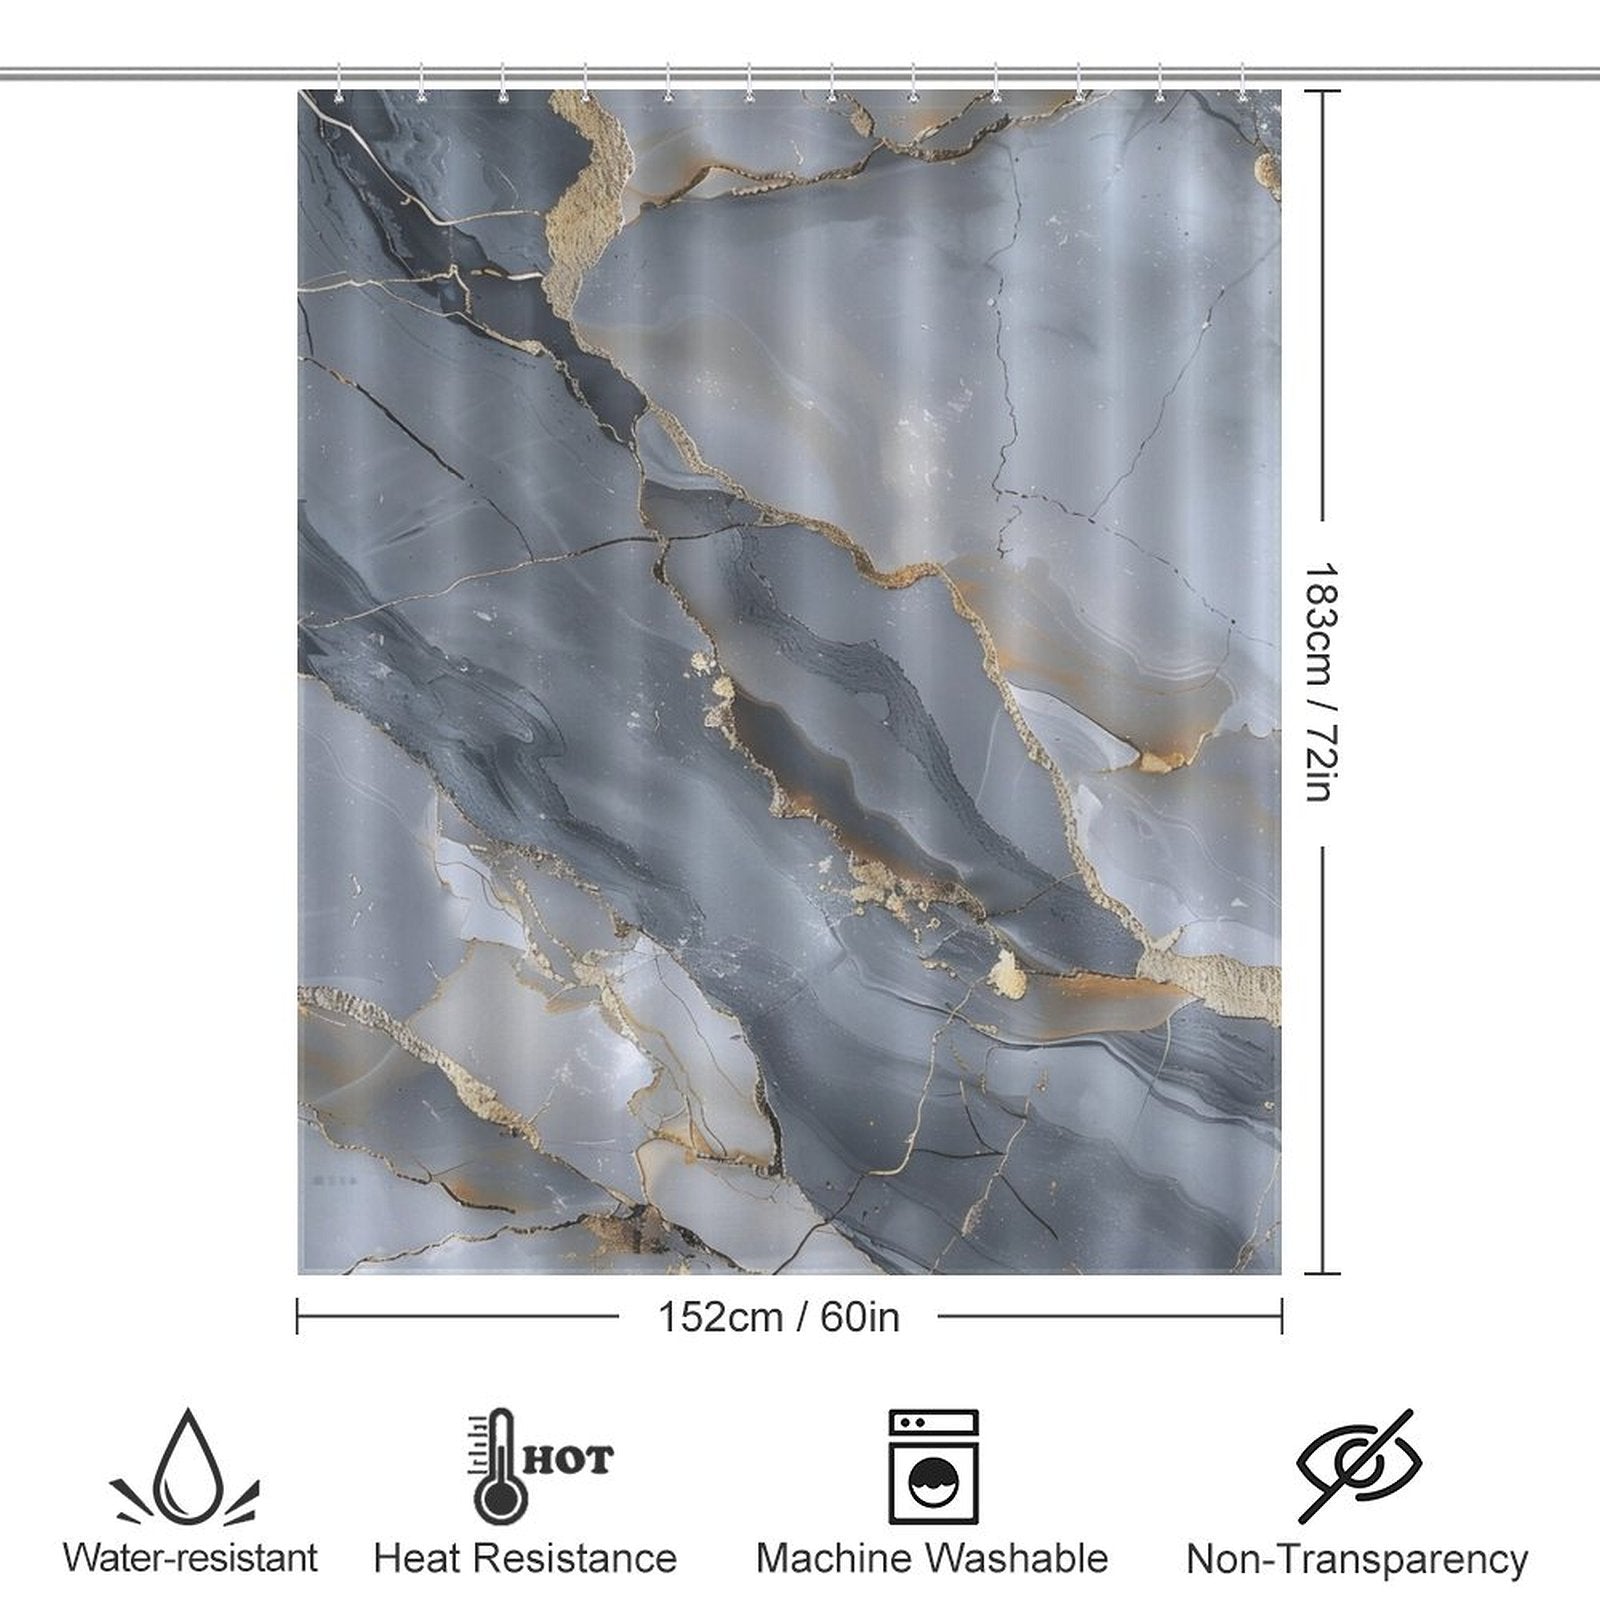 A Cotton Cat Gray Gold Stripe Abstract Marble Texture Art Shower Curtain featuring luxurious gold marble patterns and an abstract marble texture. It measures 183 cm (72 in) in height and 152 cm (60 in) in width. The curtain is water-resistant, heat-resistant, machine washable, and non-transparent.